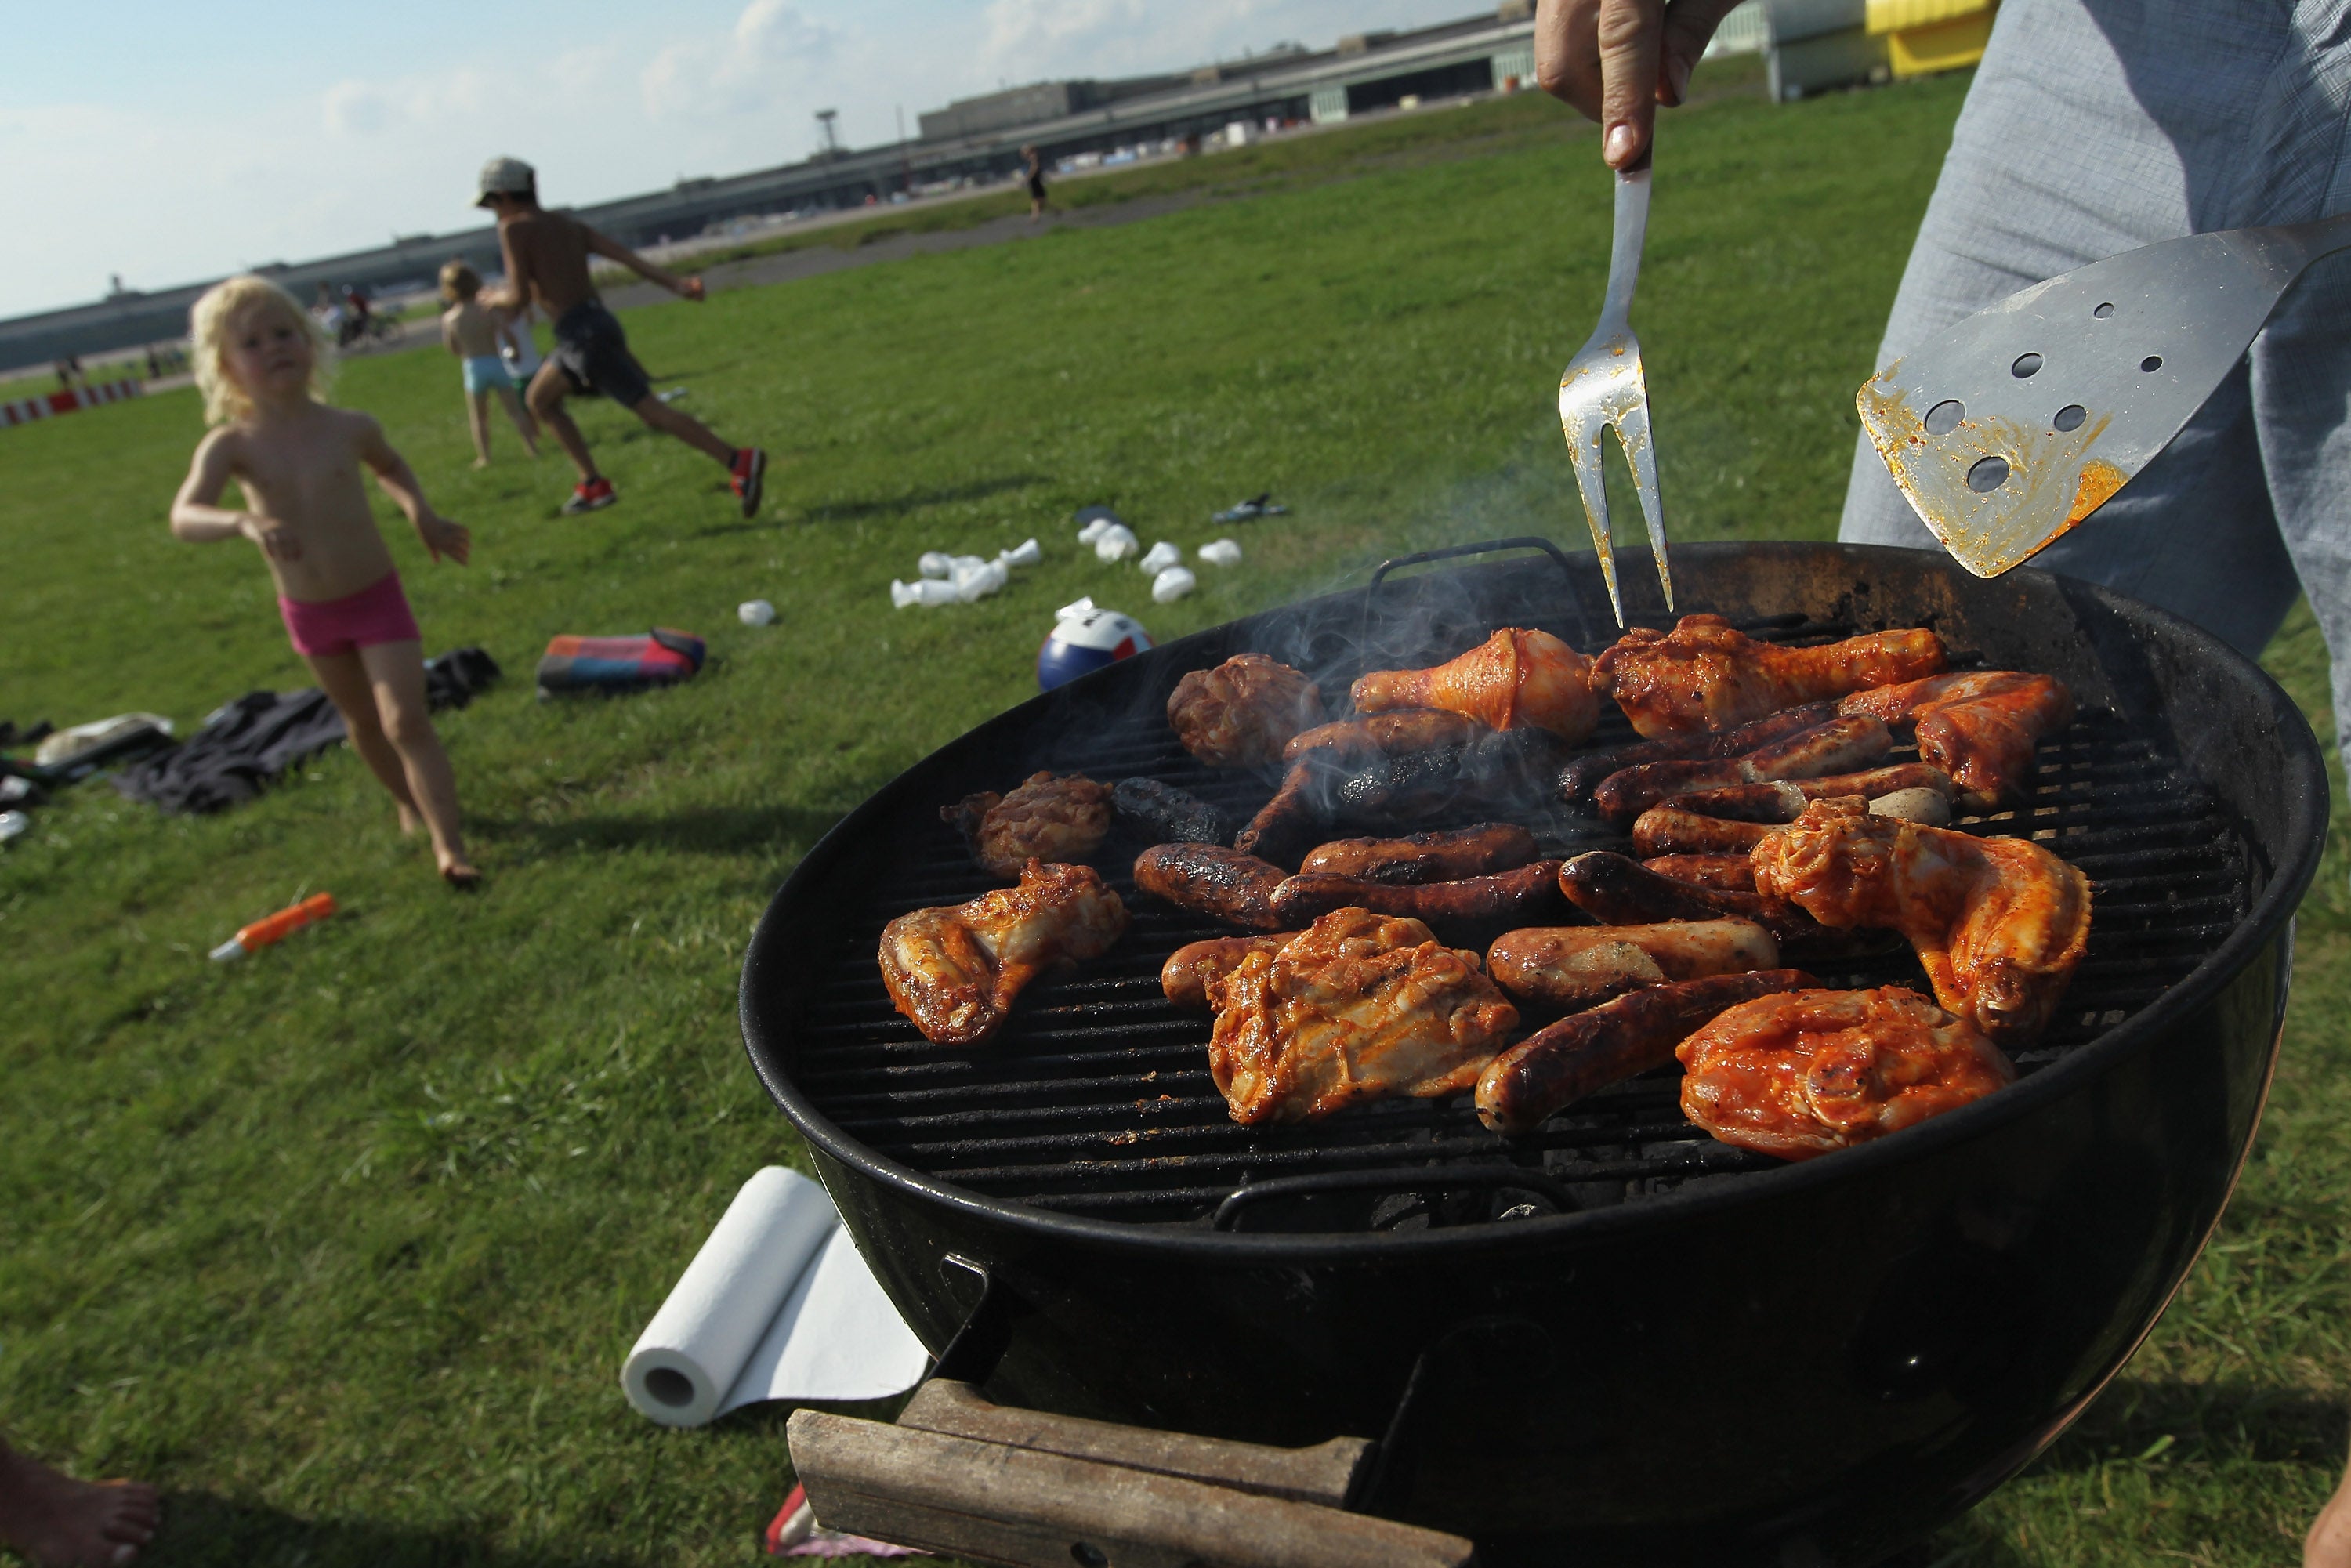 Some people said they even cooked on the grill every day in the summer months